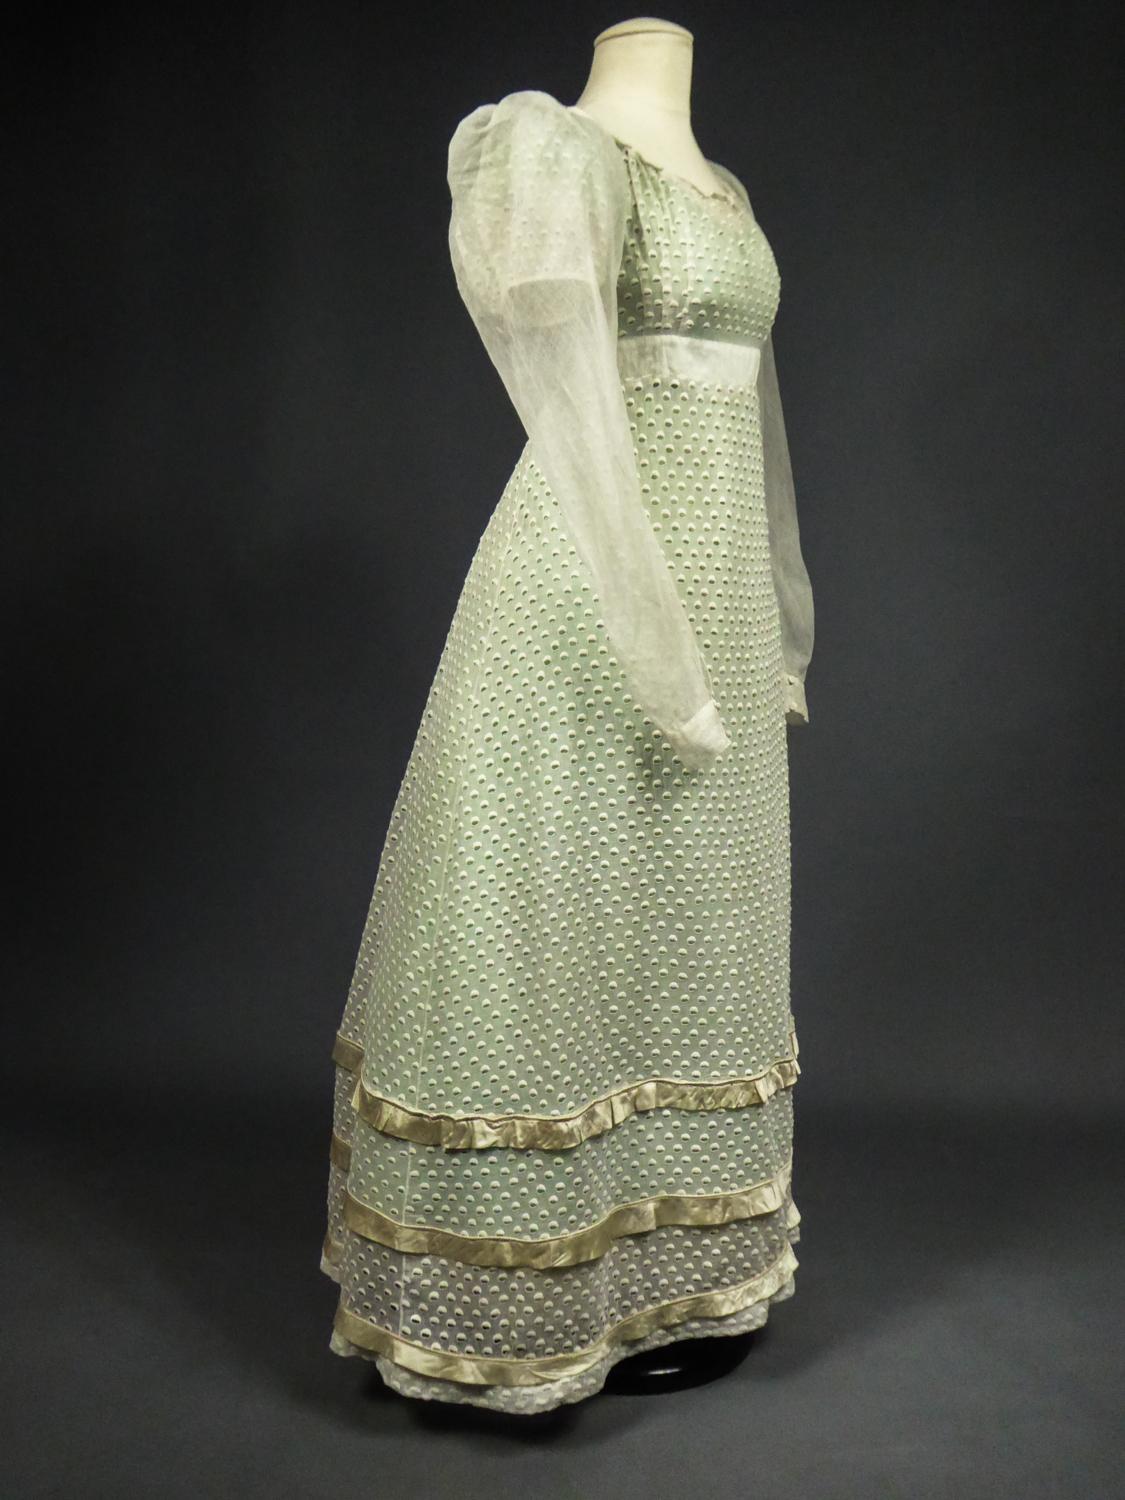 Circa 1815/1820.
France

Day dress in white embroidery or Broderie Anglaise in cotton chiffon openwork of a semis of embroidered circles revealing the color of the underdress ( not included in the sale). Curved bodice with high waist and pleated